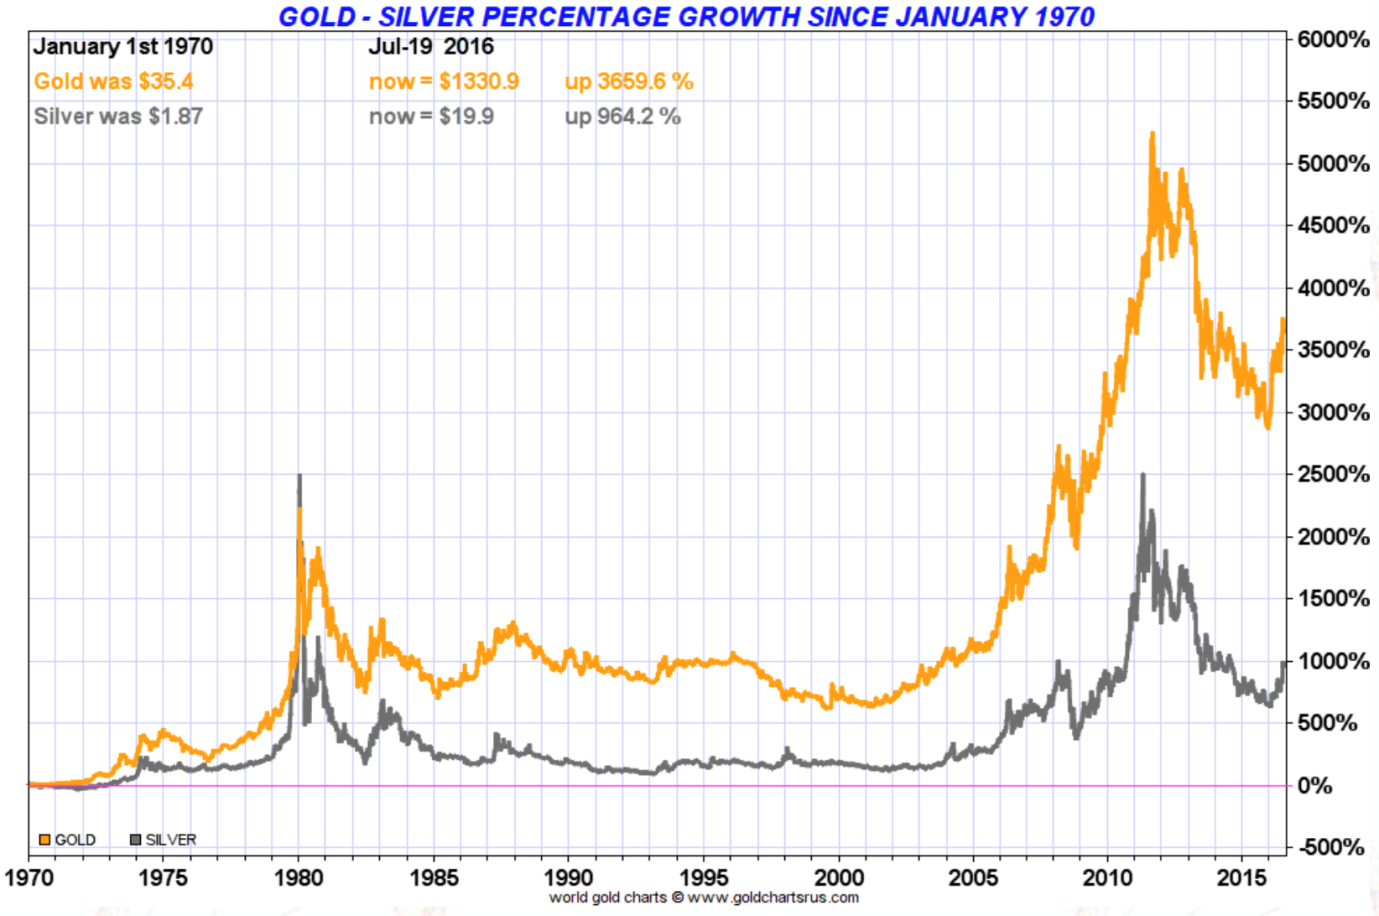 Gold - Silver Percentage Growth since January 1970